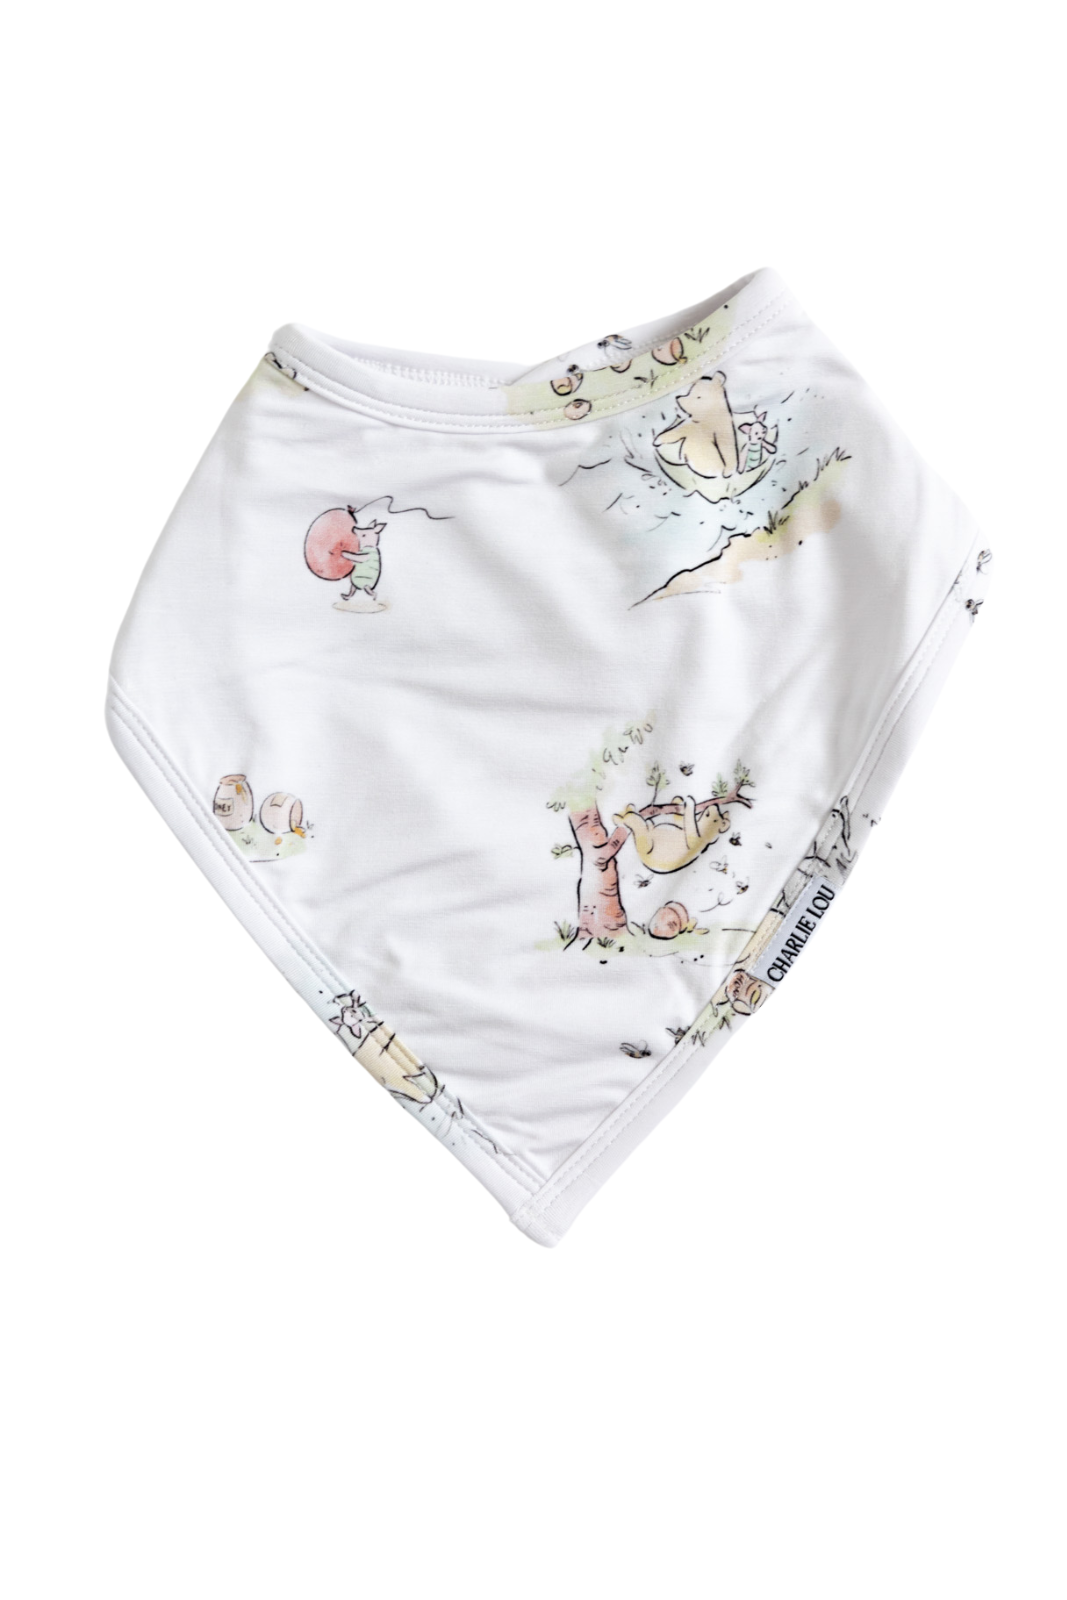 Winnie the Pooh bamboo bib with terry cloth lining and snaps on the back.